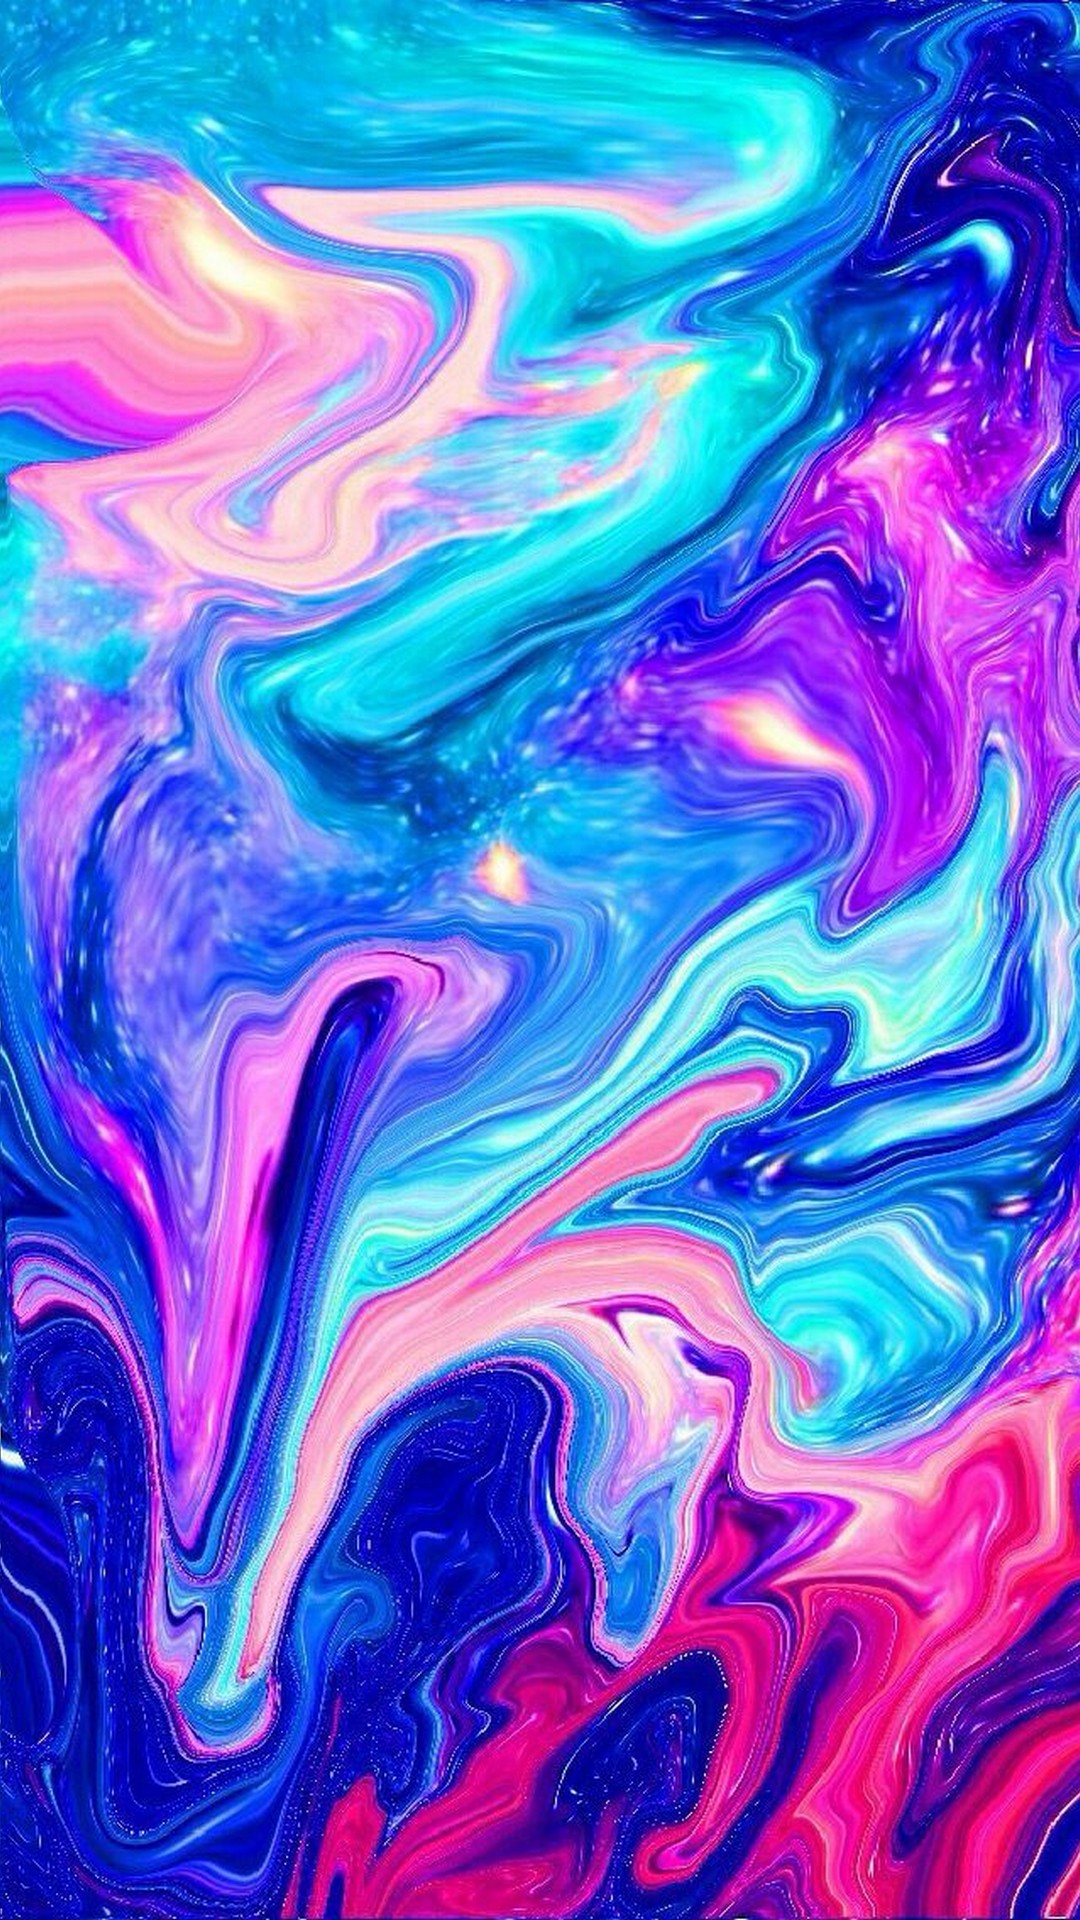 Really Cool iPhone Wallpaper Tumblr With high-resolution 1080X1920 pixel. You can set as wallpaper for Apple iPhone X, XS Max, XR, 8, 7, 6, SE, iPad. Enjoy and share your favorite HD wallpapers and background images